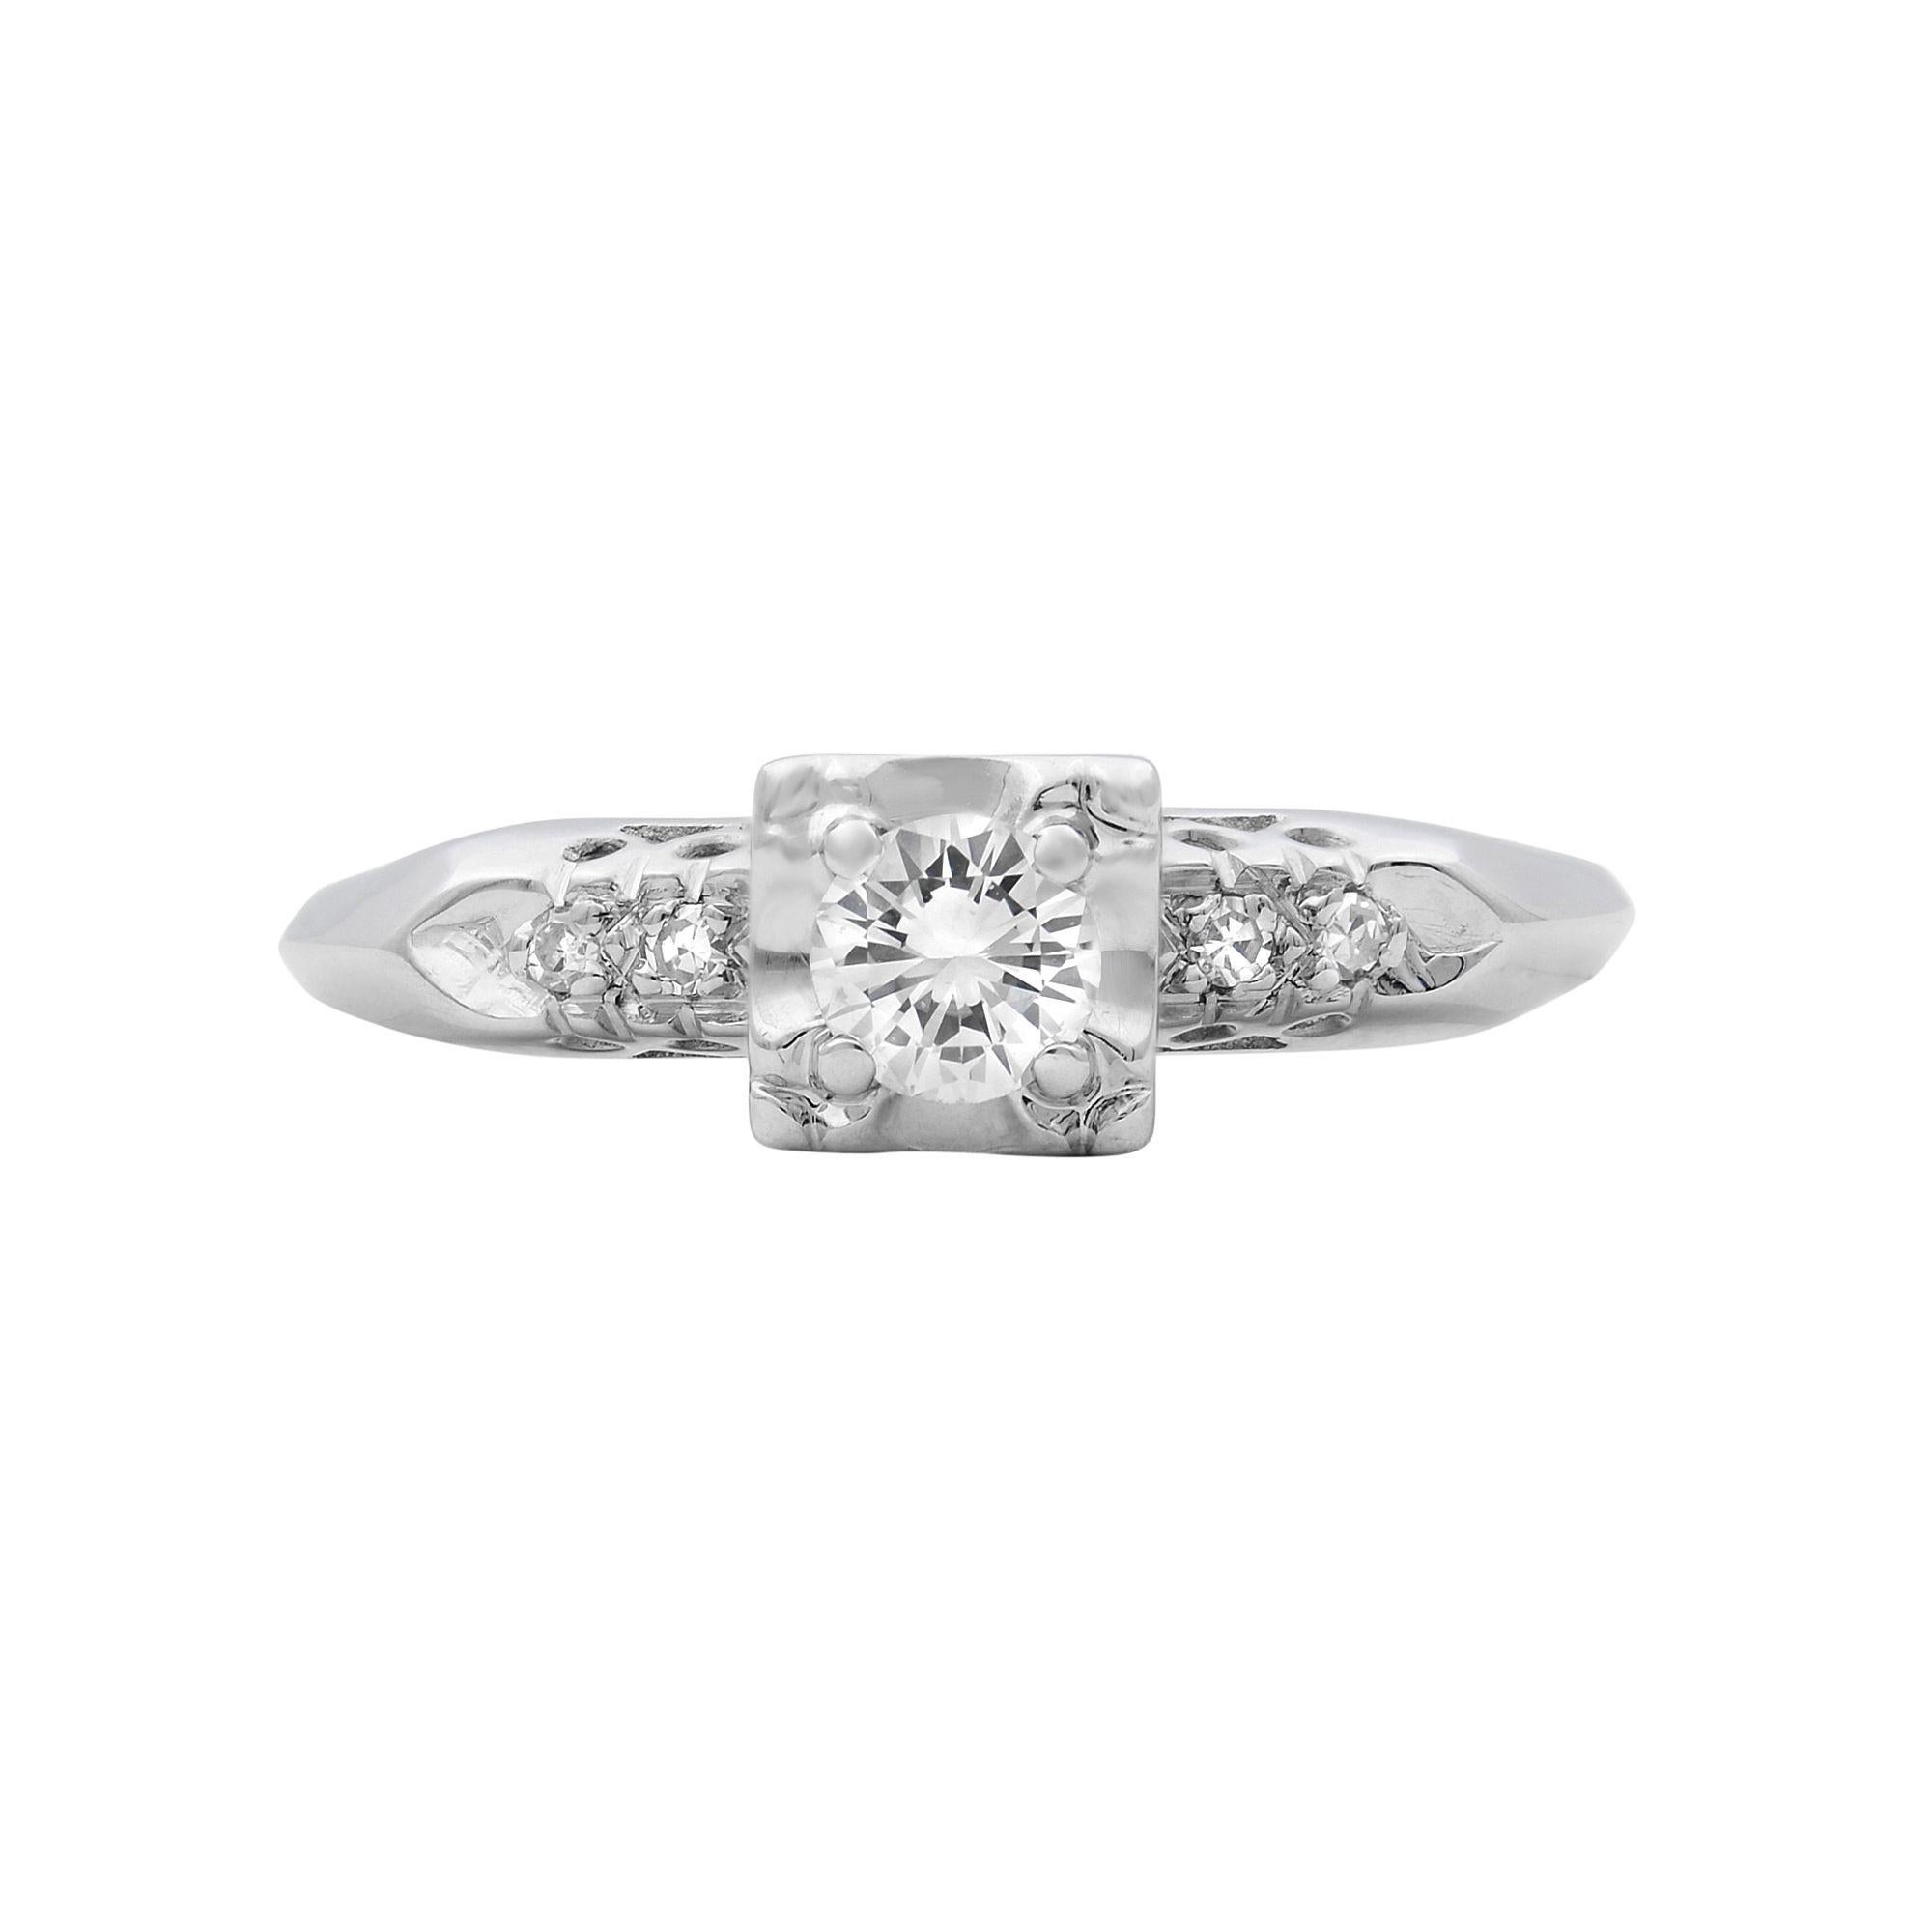 This stunning unique style engagement ring holds a small 0.20 carat center stone. Crafted in 14k white gold. This is an old style design. Looks very delicate. Total carat weight: 0.25. Diamond color G and VS2 clarity. Ring size 7.5. Comes in a